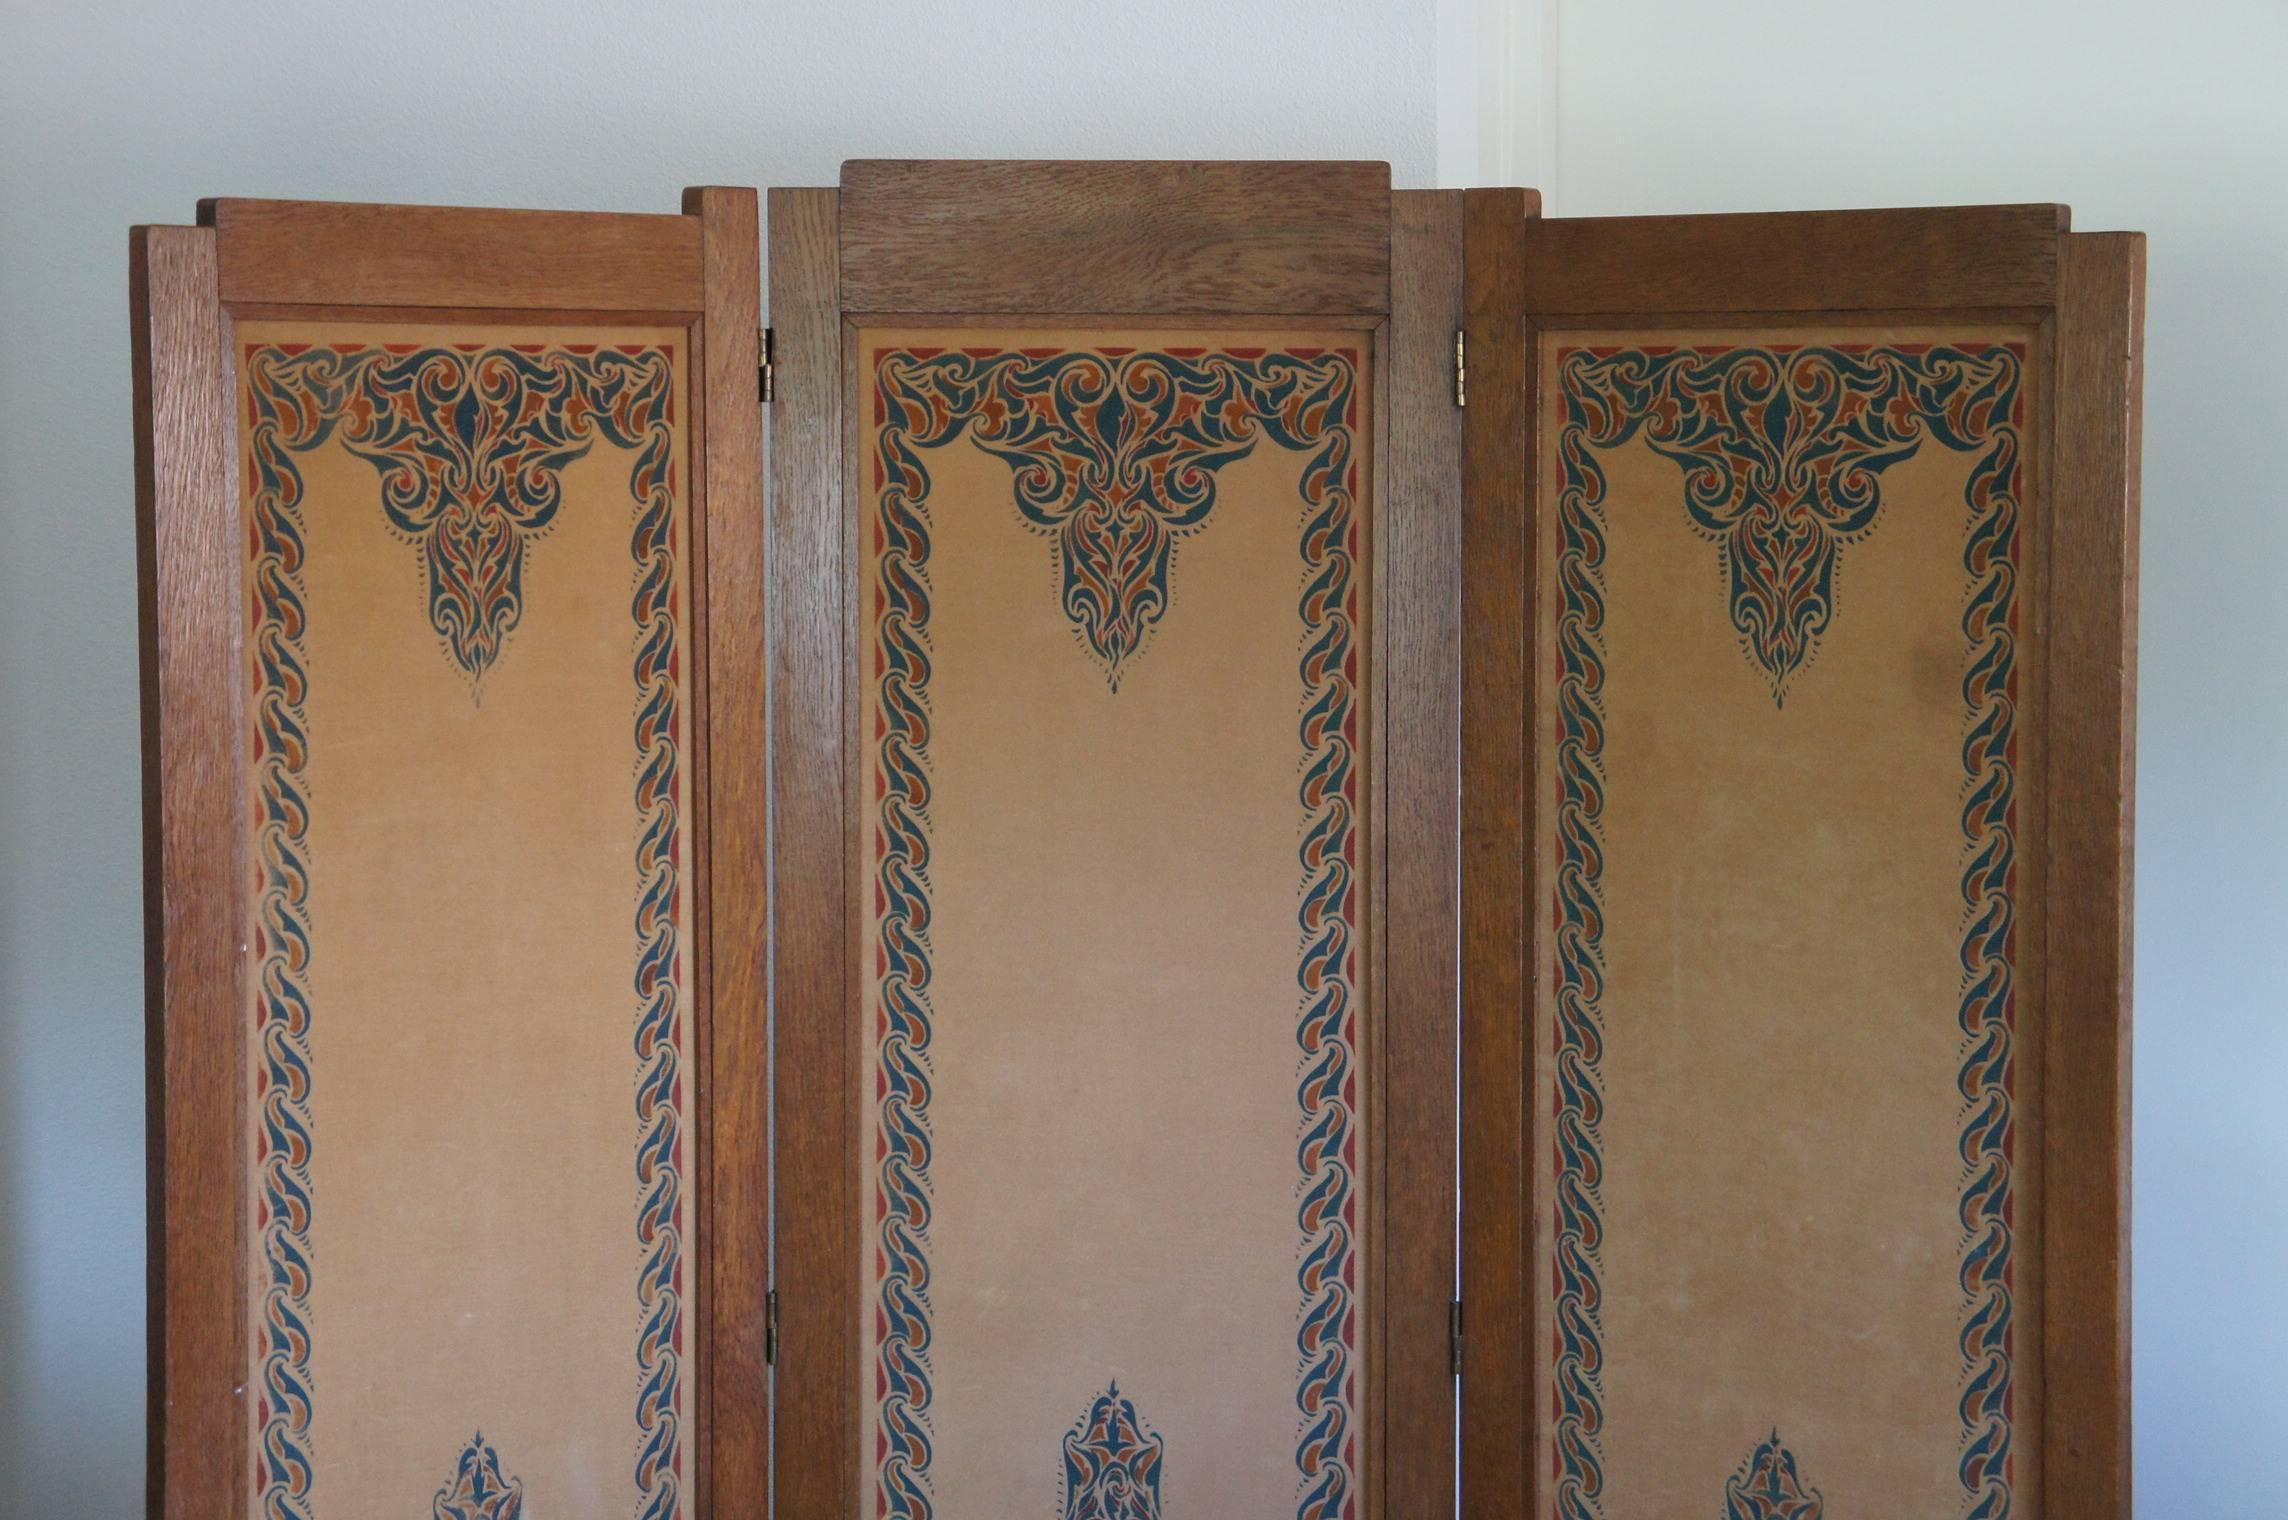 Unique Amsterdam School folding screen from the early 1900's.

This stylish folding screen is a fine example of how the famous Amsterdam School was influenced by the former Dutch colony of Indonesia. The stunning, colorful and flowing motives are an